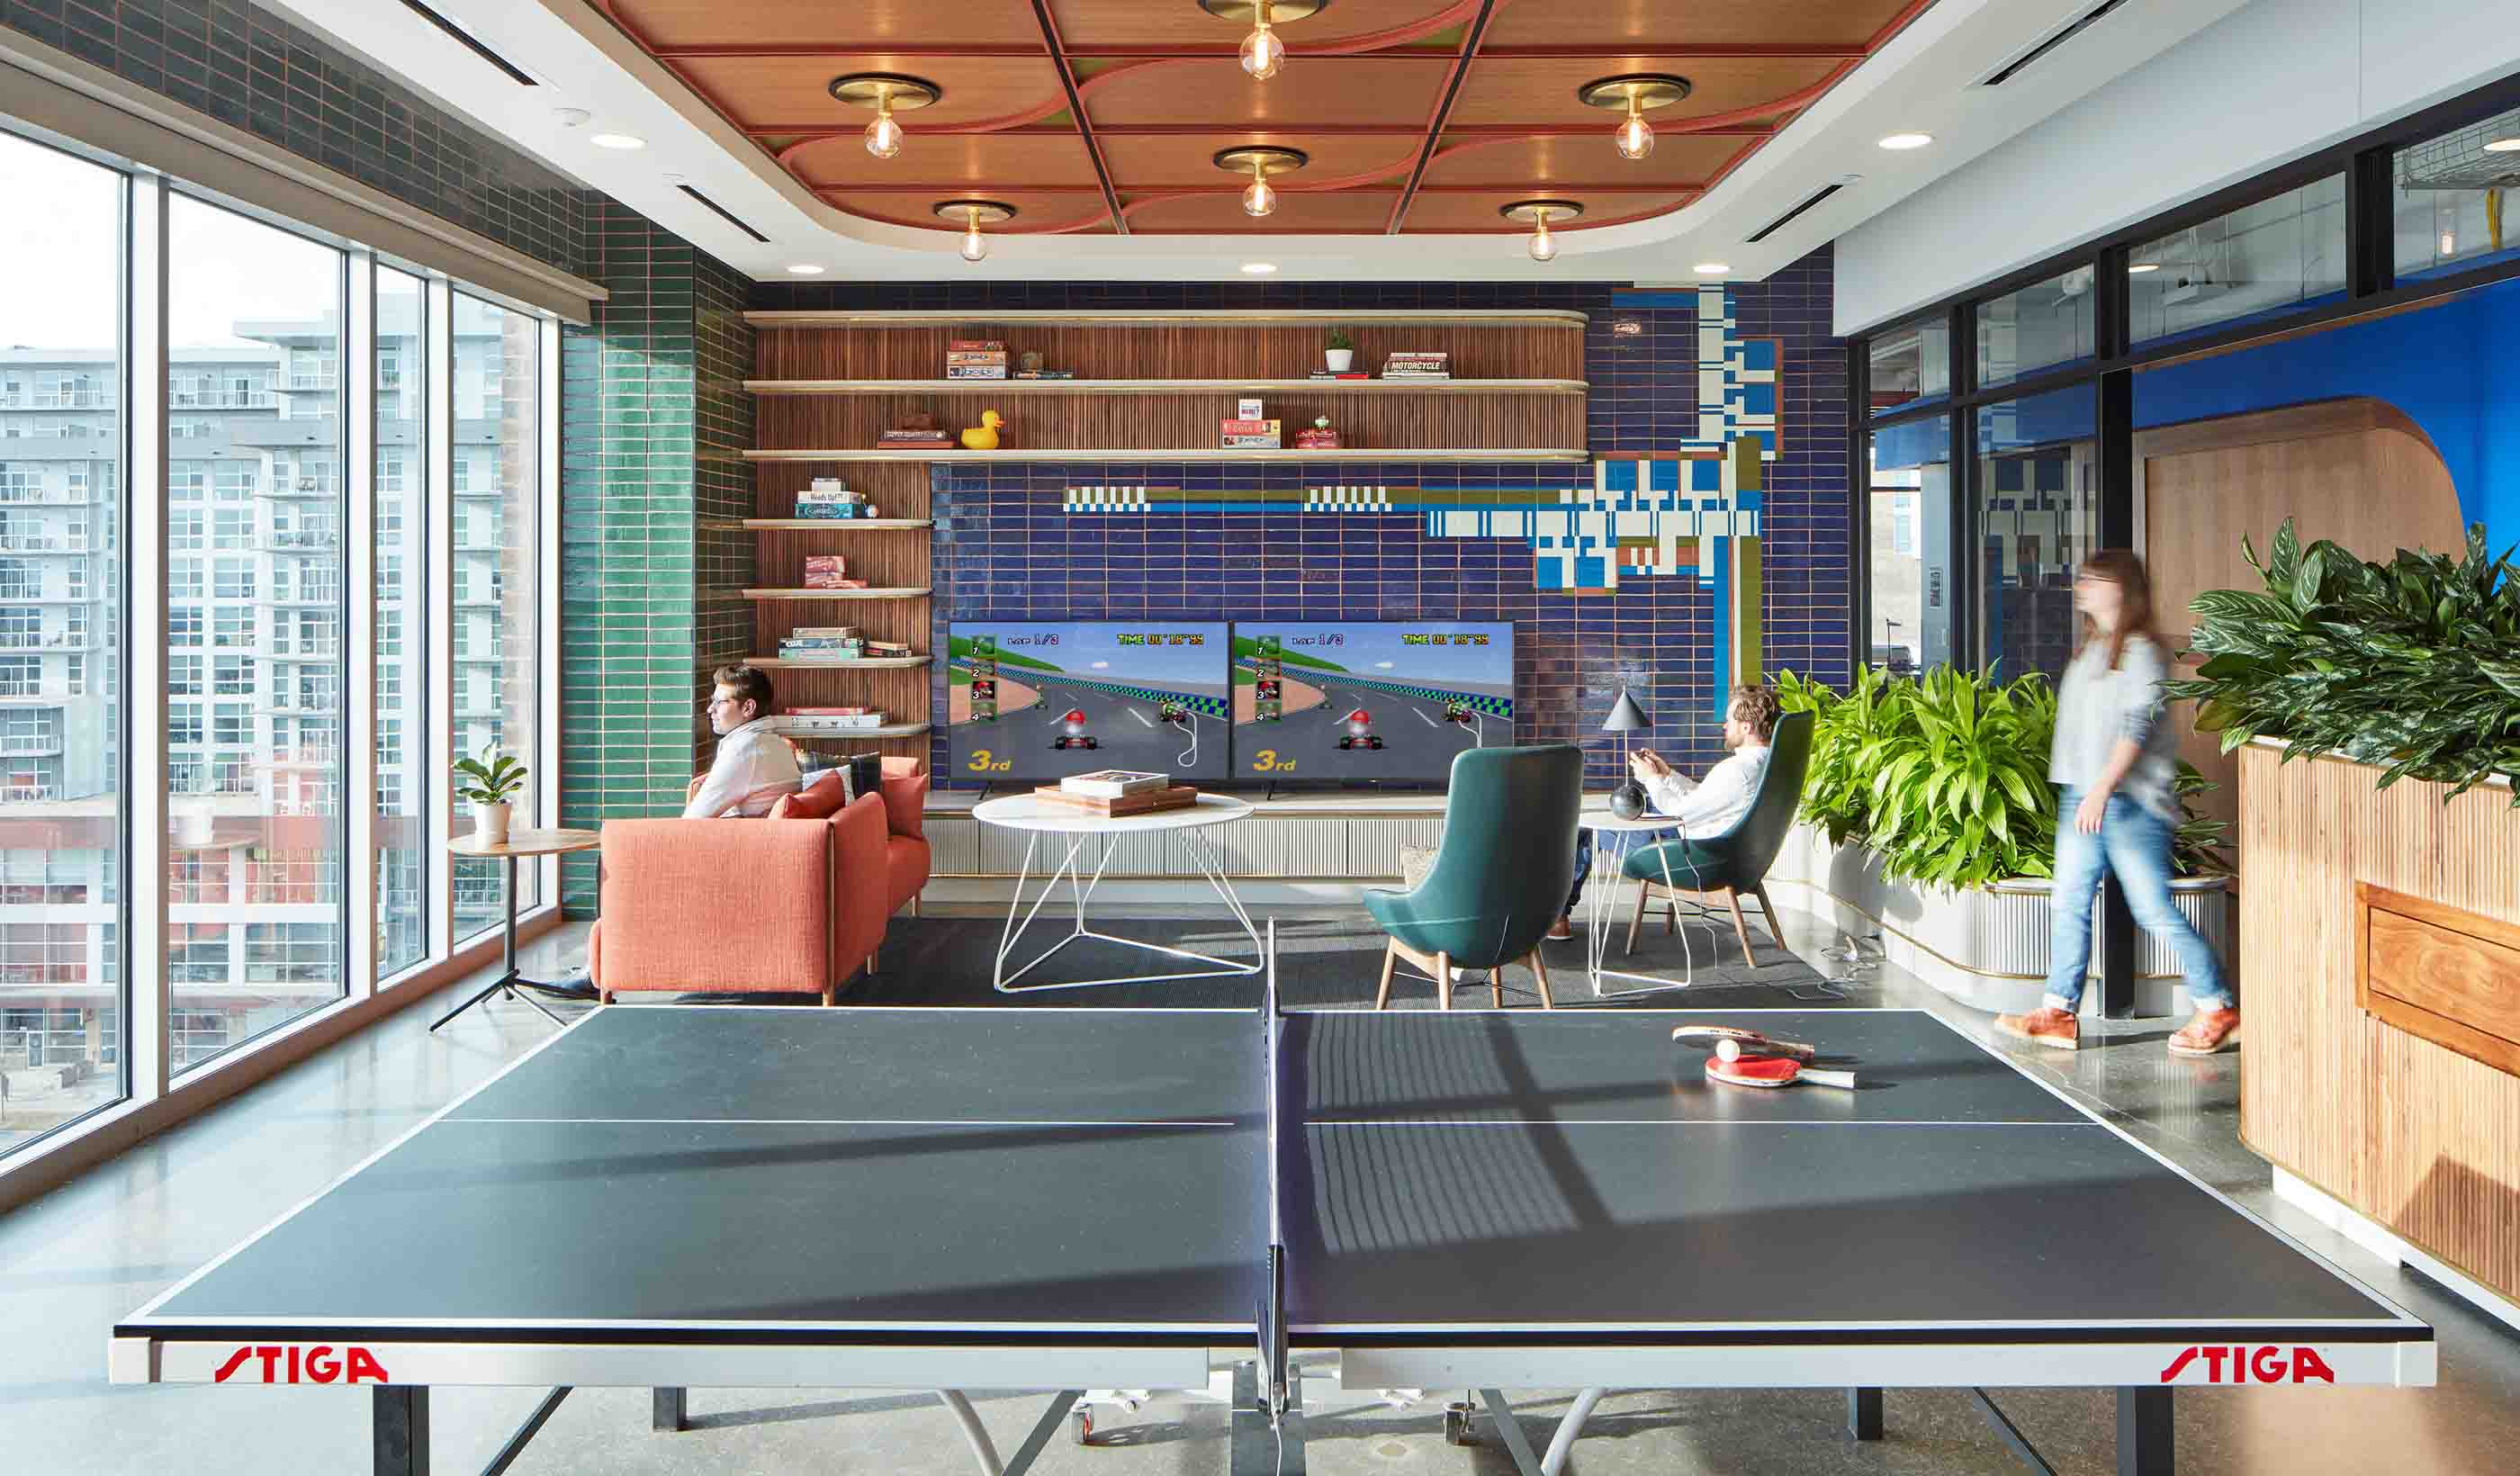 From A to Gen Z: Designing better workspaces for everyone